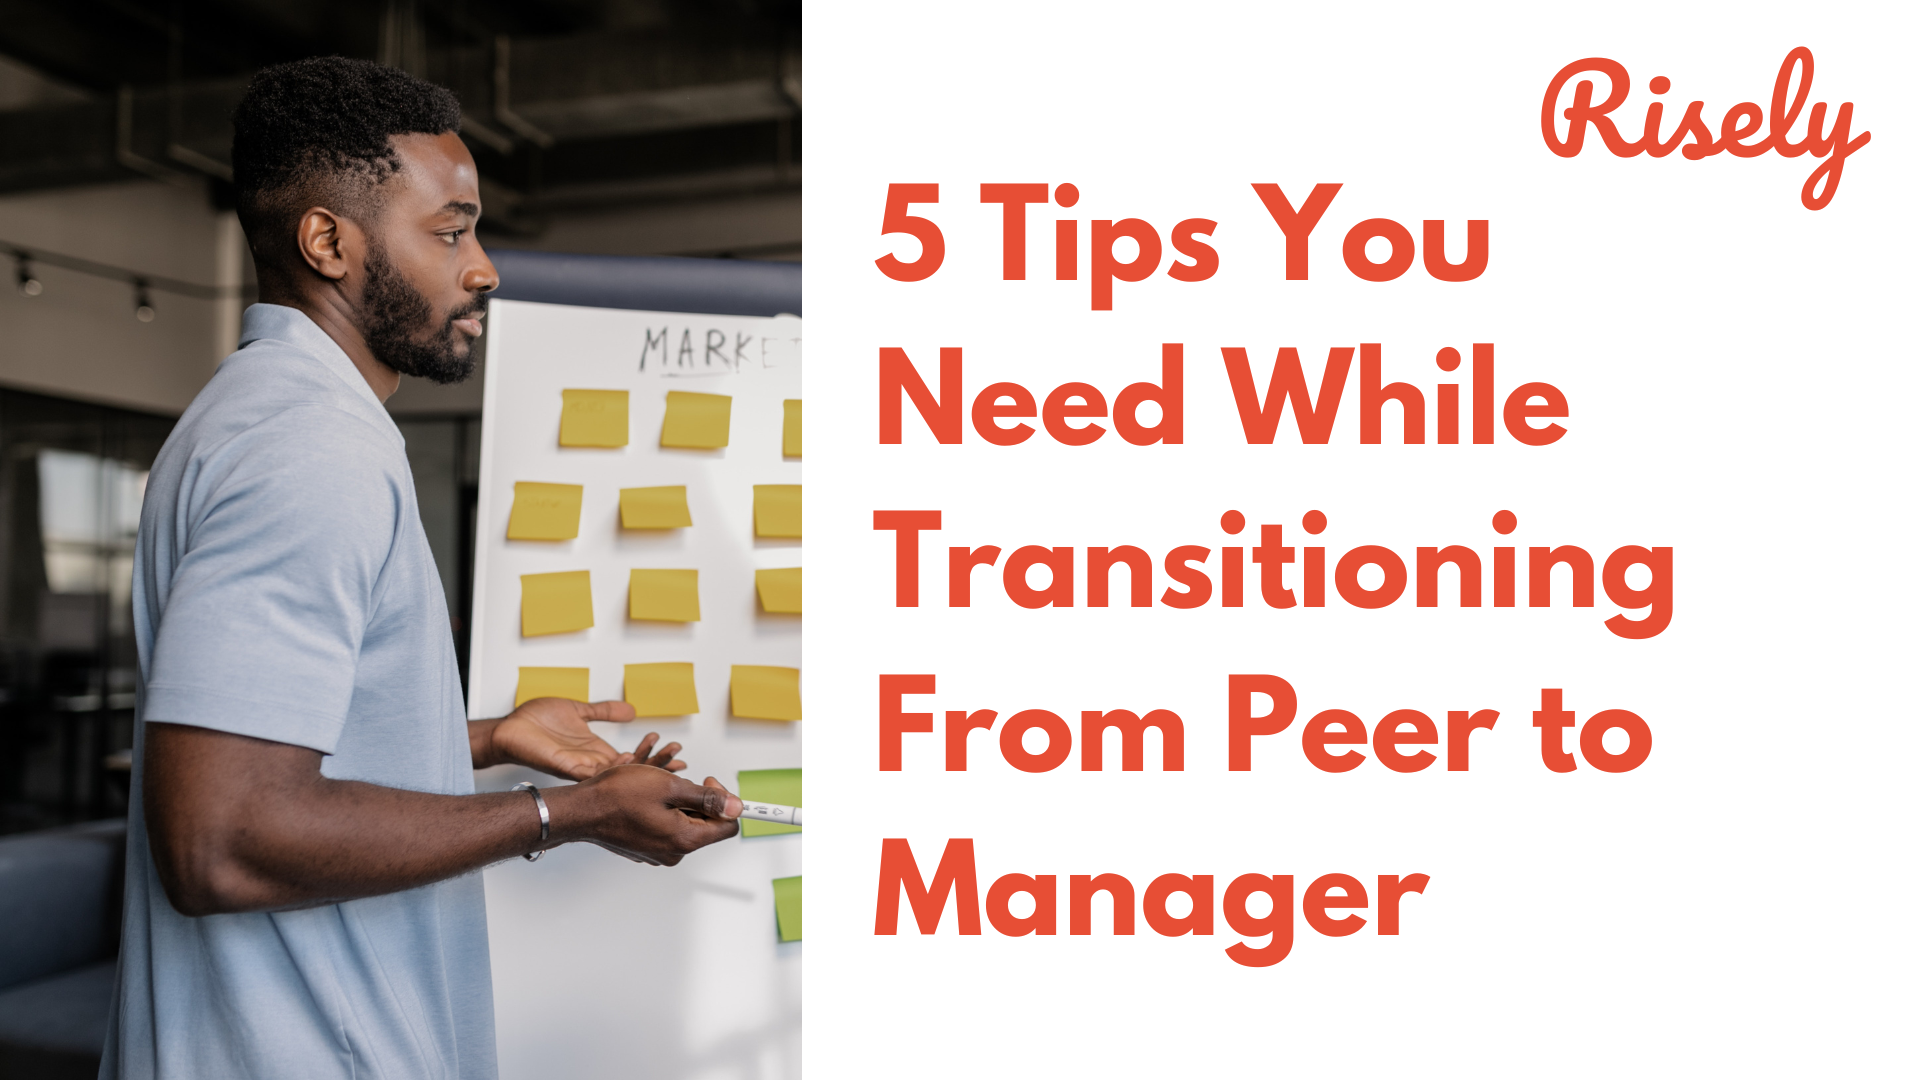 5 Tips You Need While Transitioning From Peer to Manager